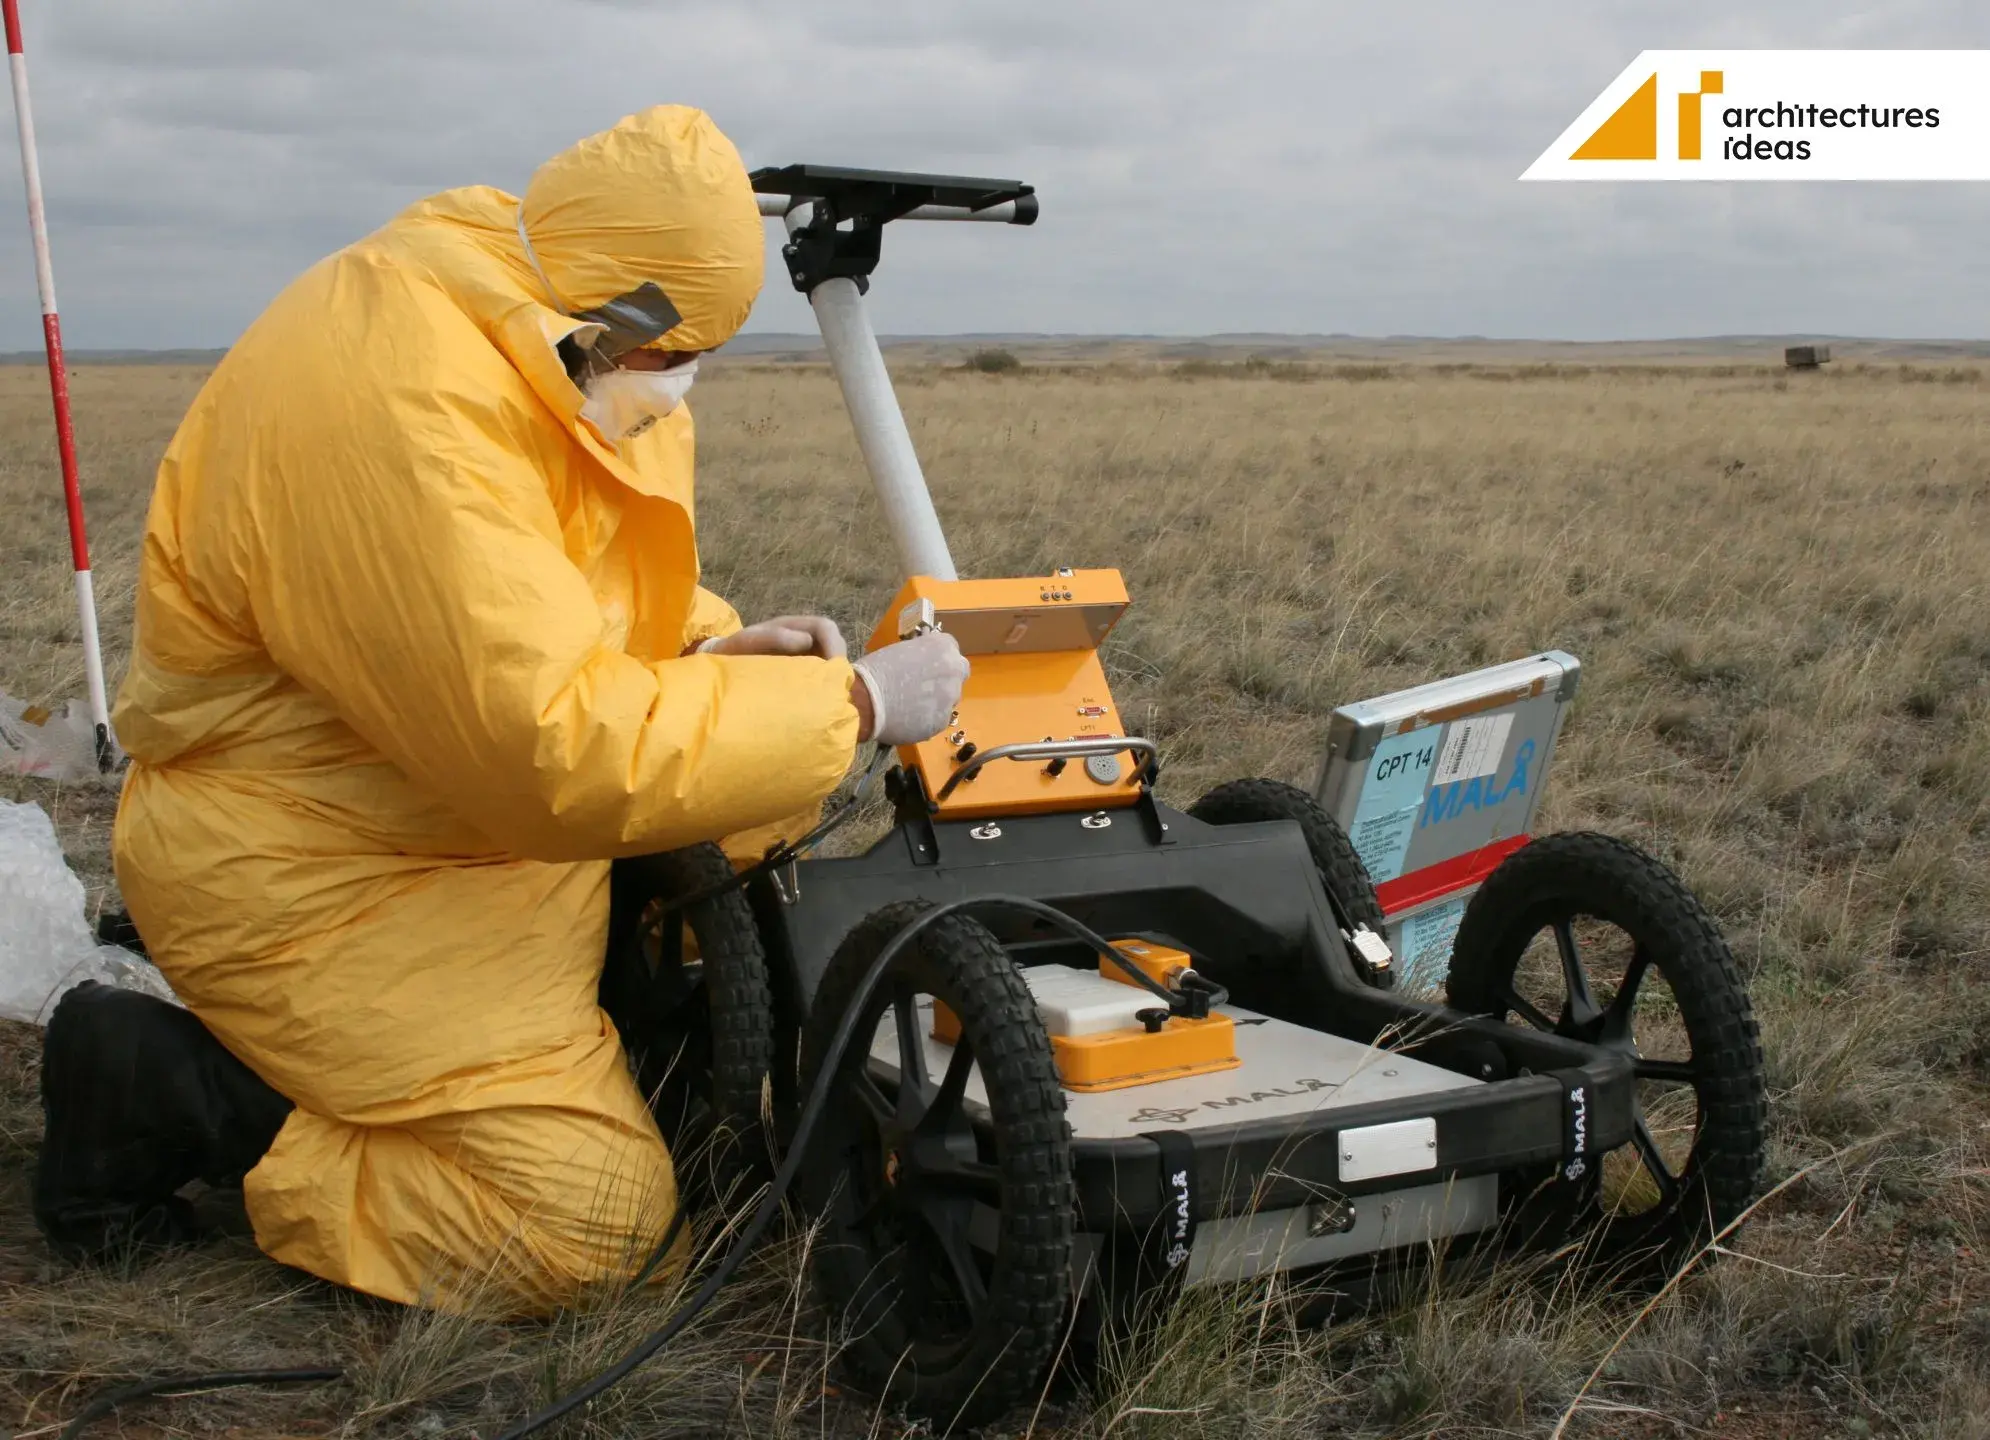  A man standing next to a small orange and black Ground Penetrating Radar
